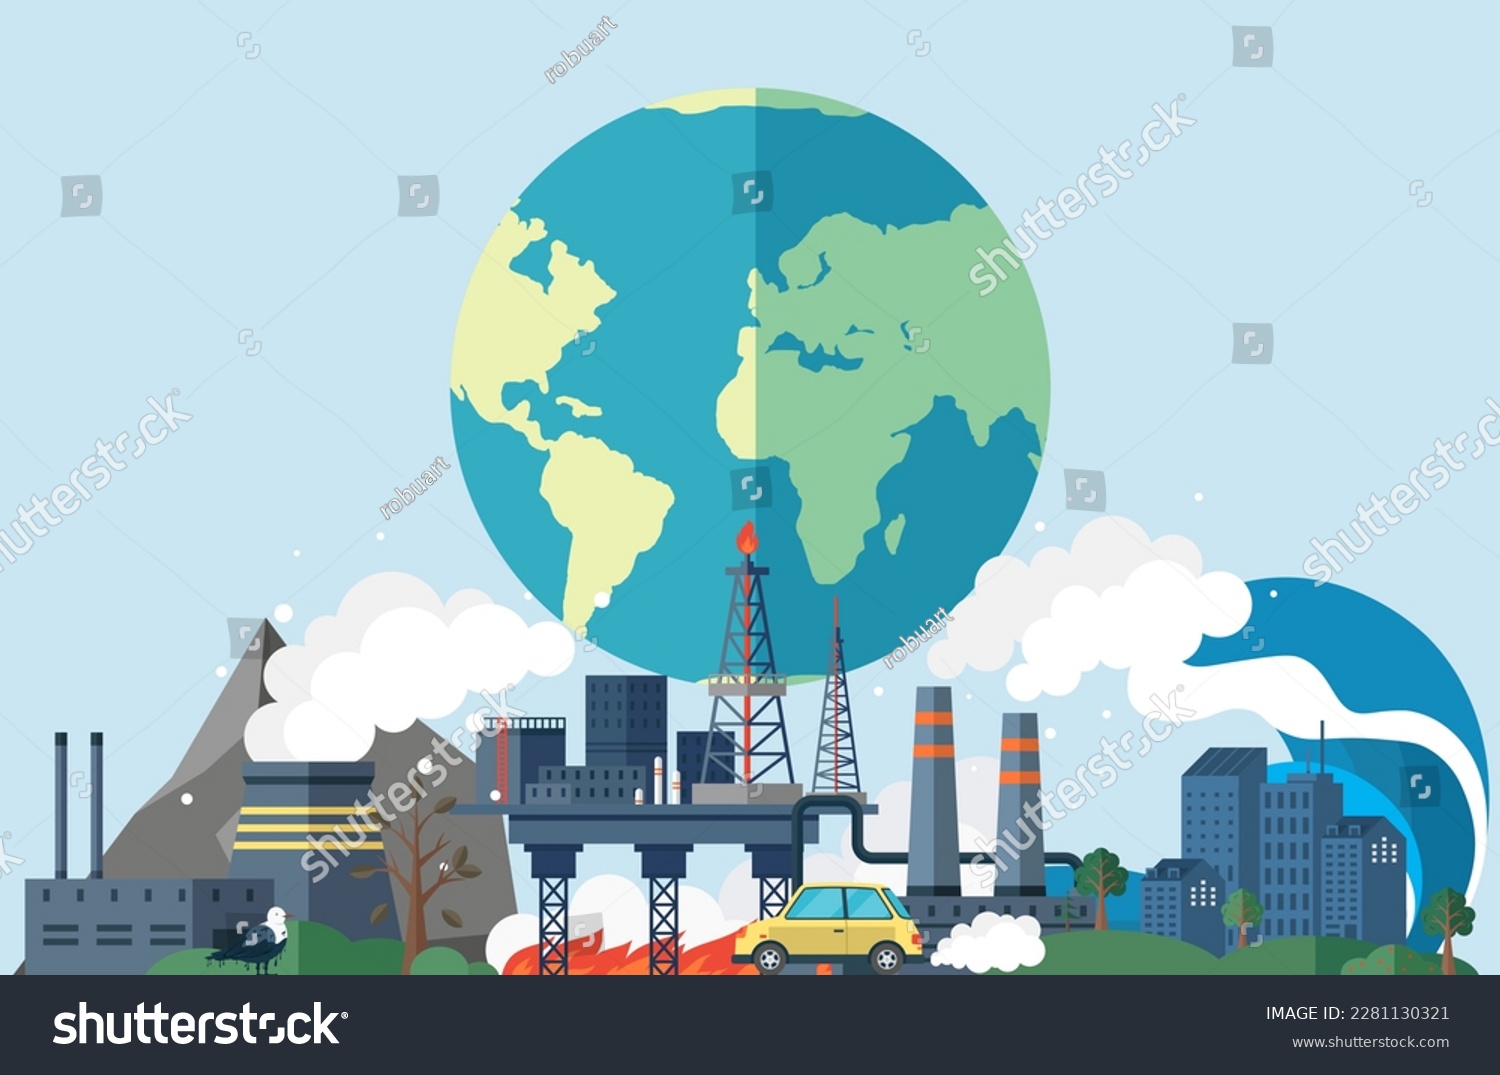 Climate change weather global greenhouse warming risks. Waste disposal, air and water pollution. Global warming, greenhouse gas emissions, deforestation. CO2 carbon dioxide emissions climate pollution #2281130321